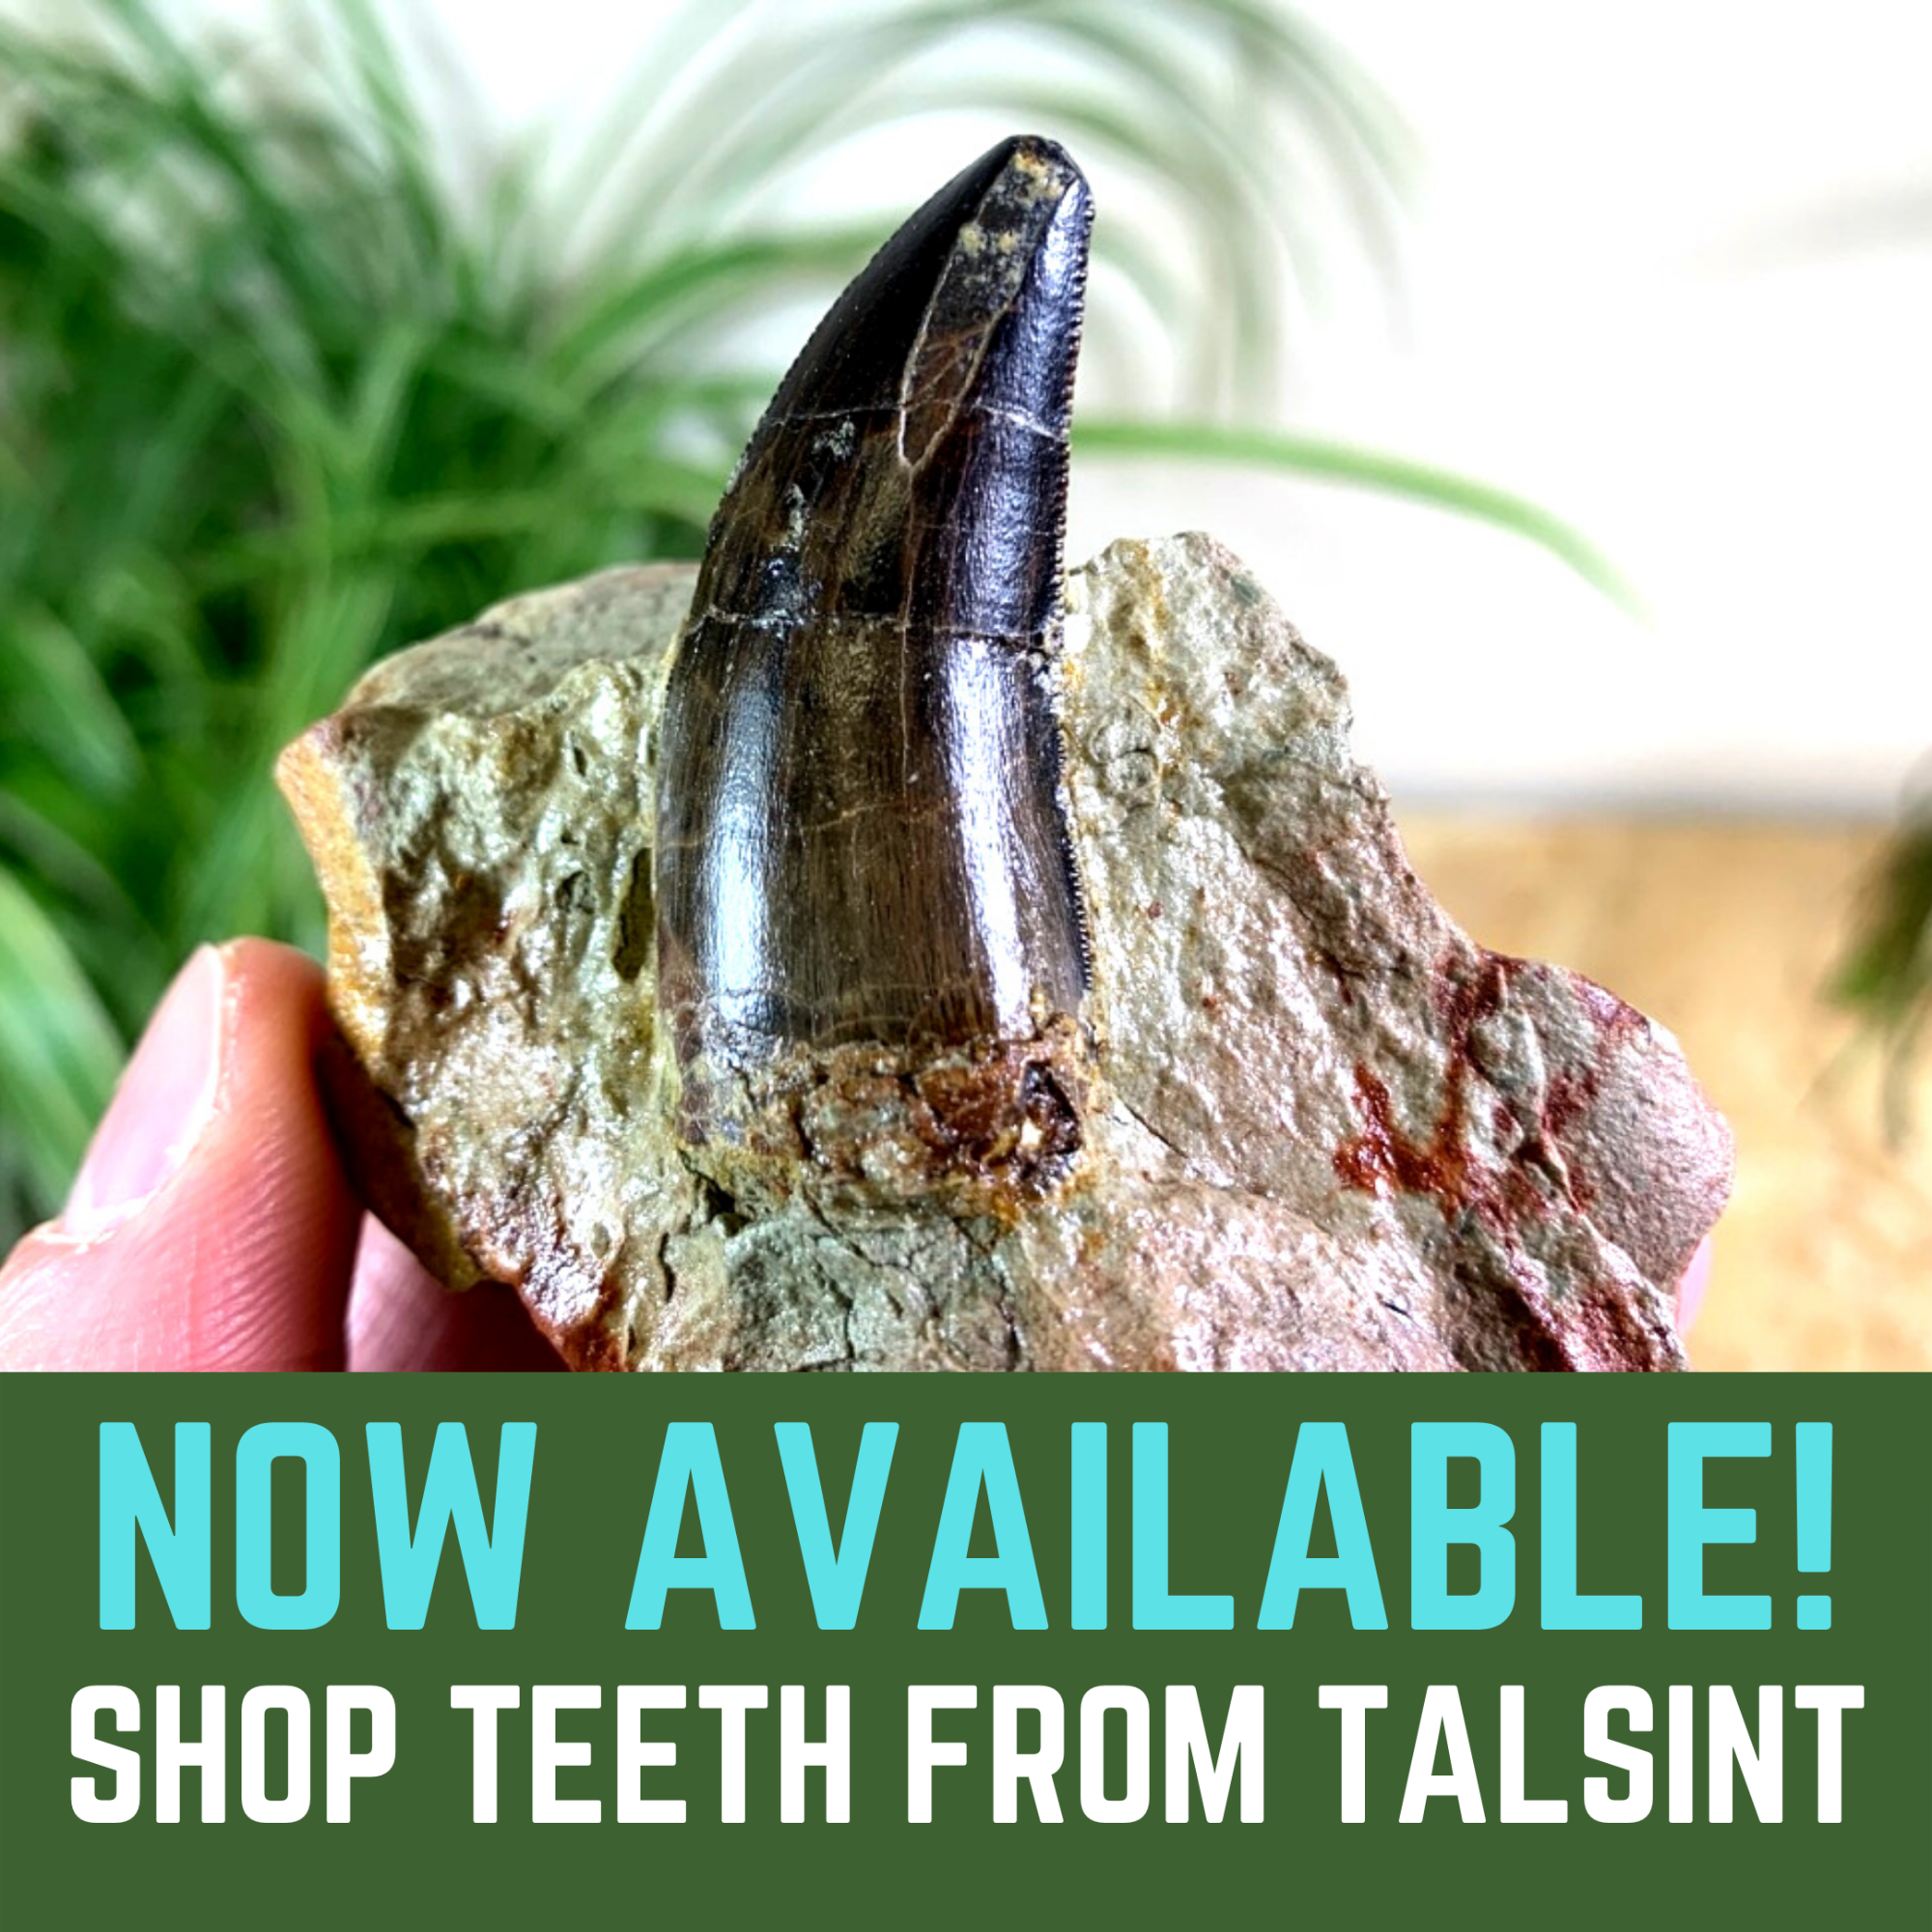 Shop Teeth from Talsint, Atlas Mountains, Morocco